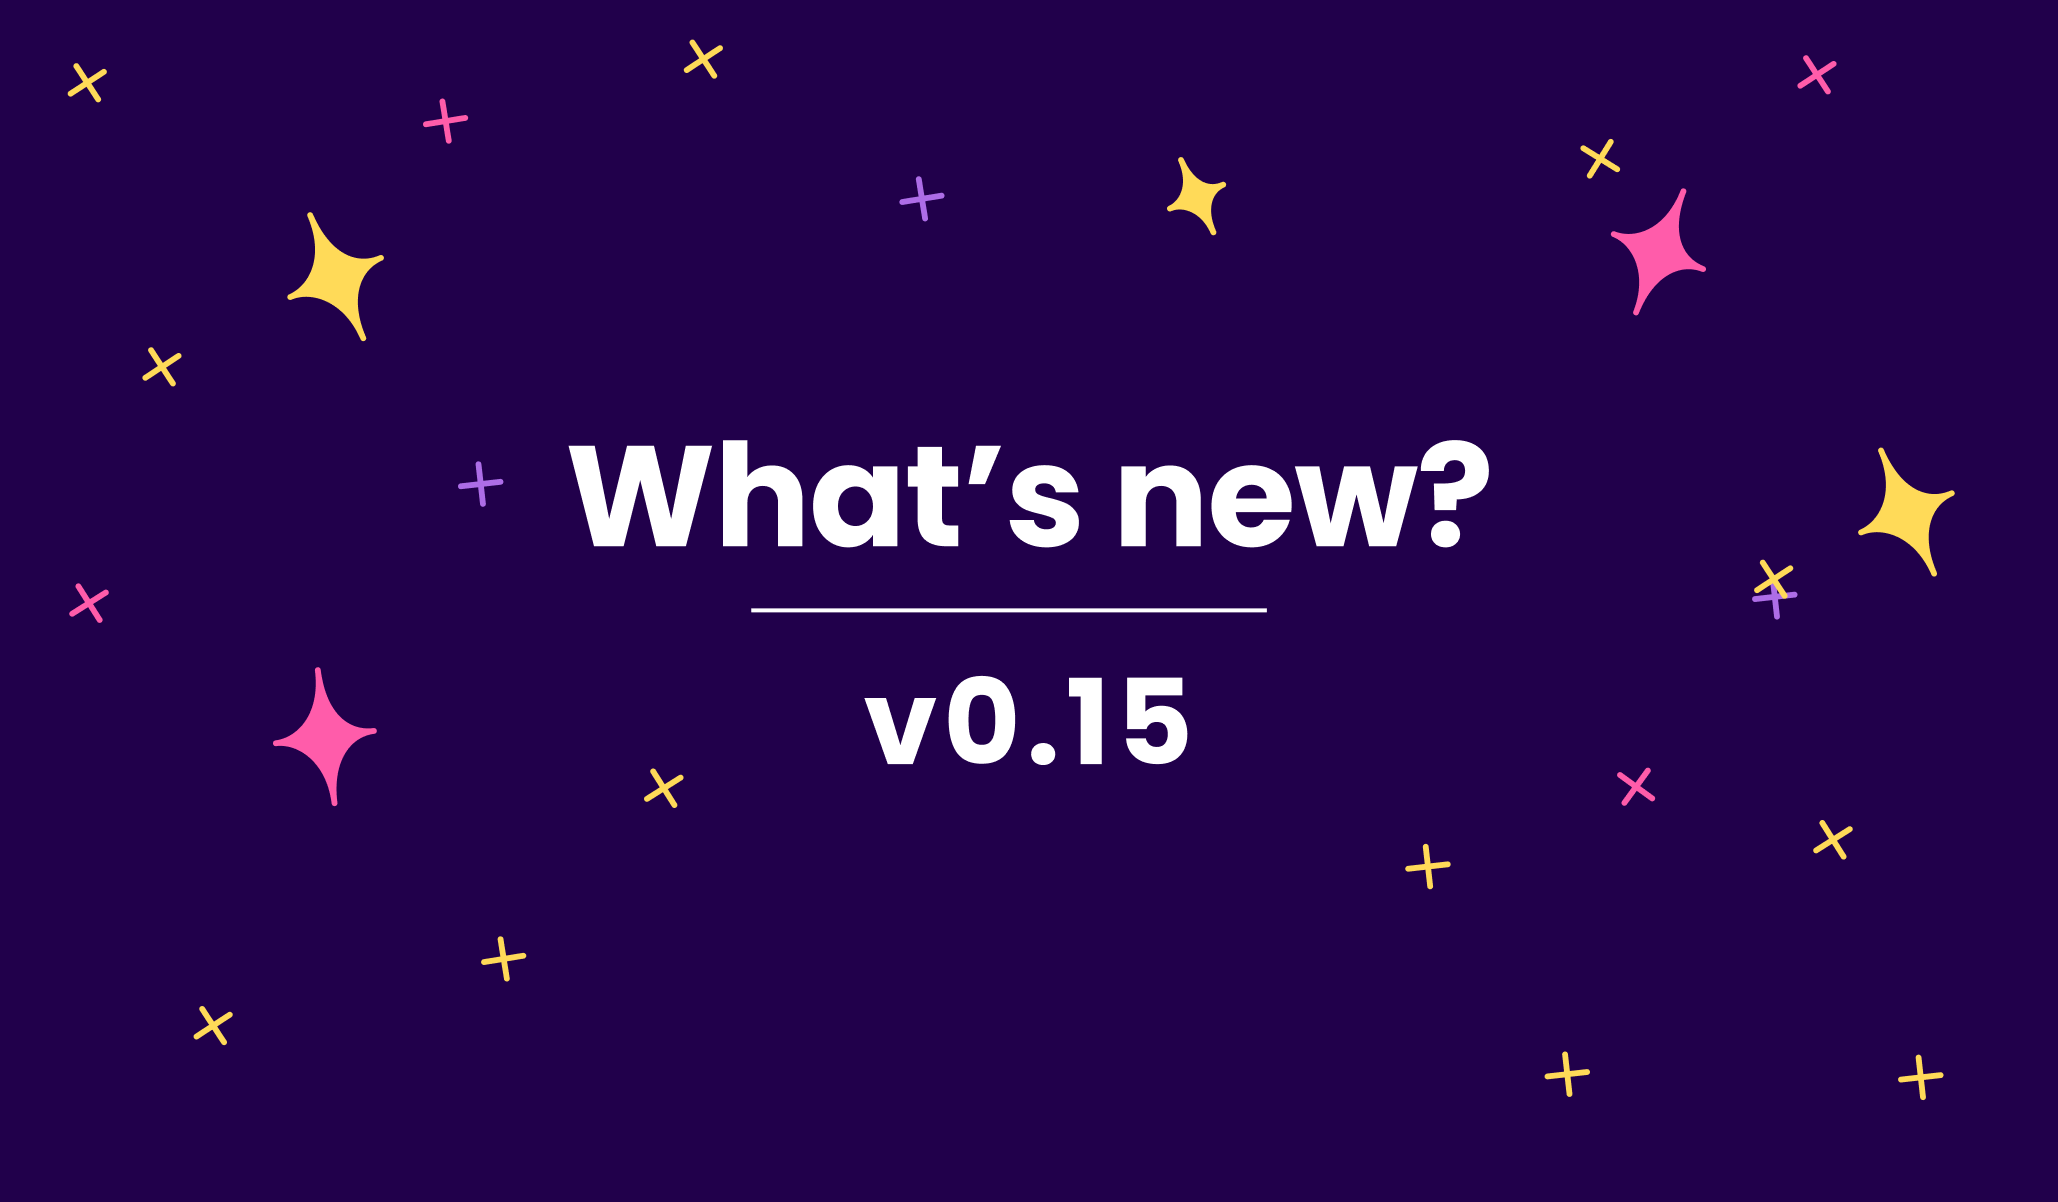 What's new in v0.15.0